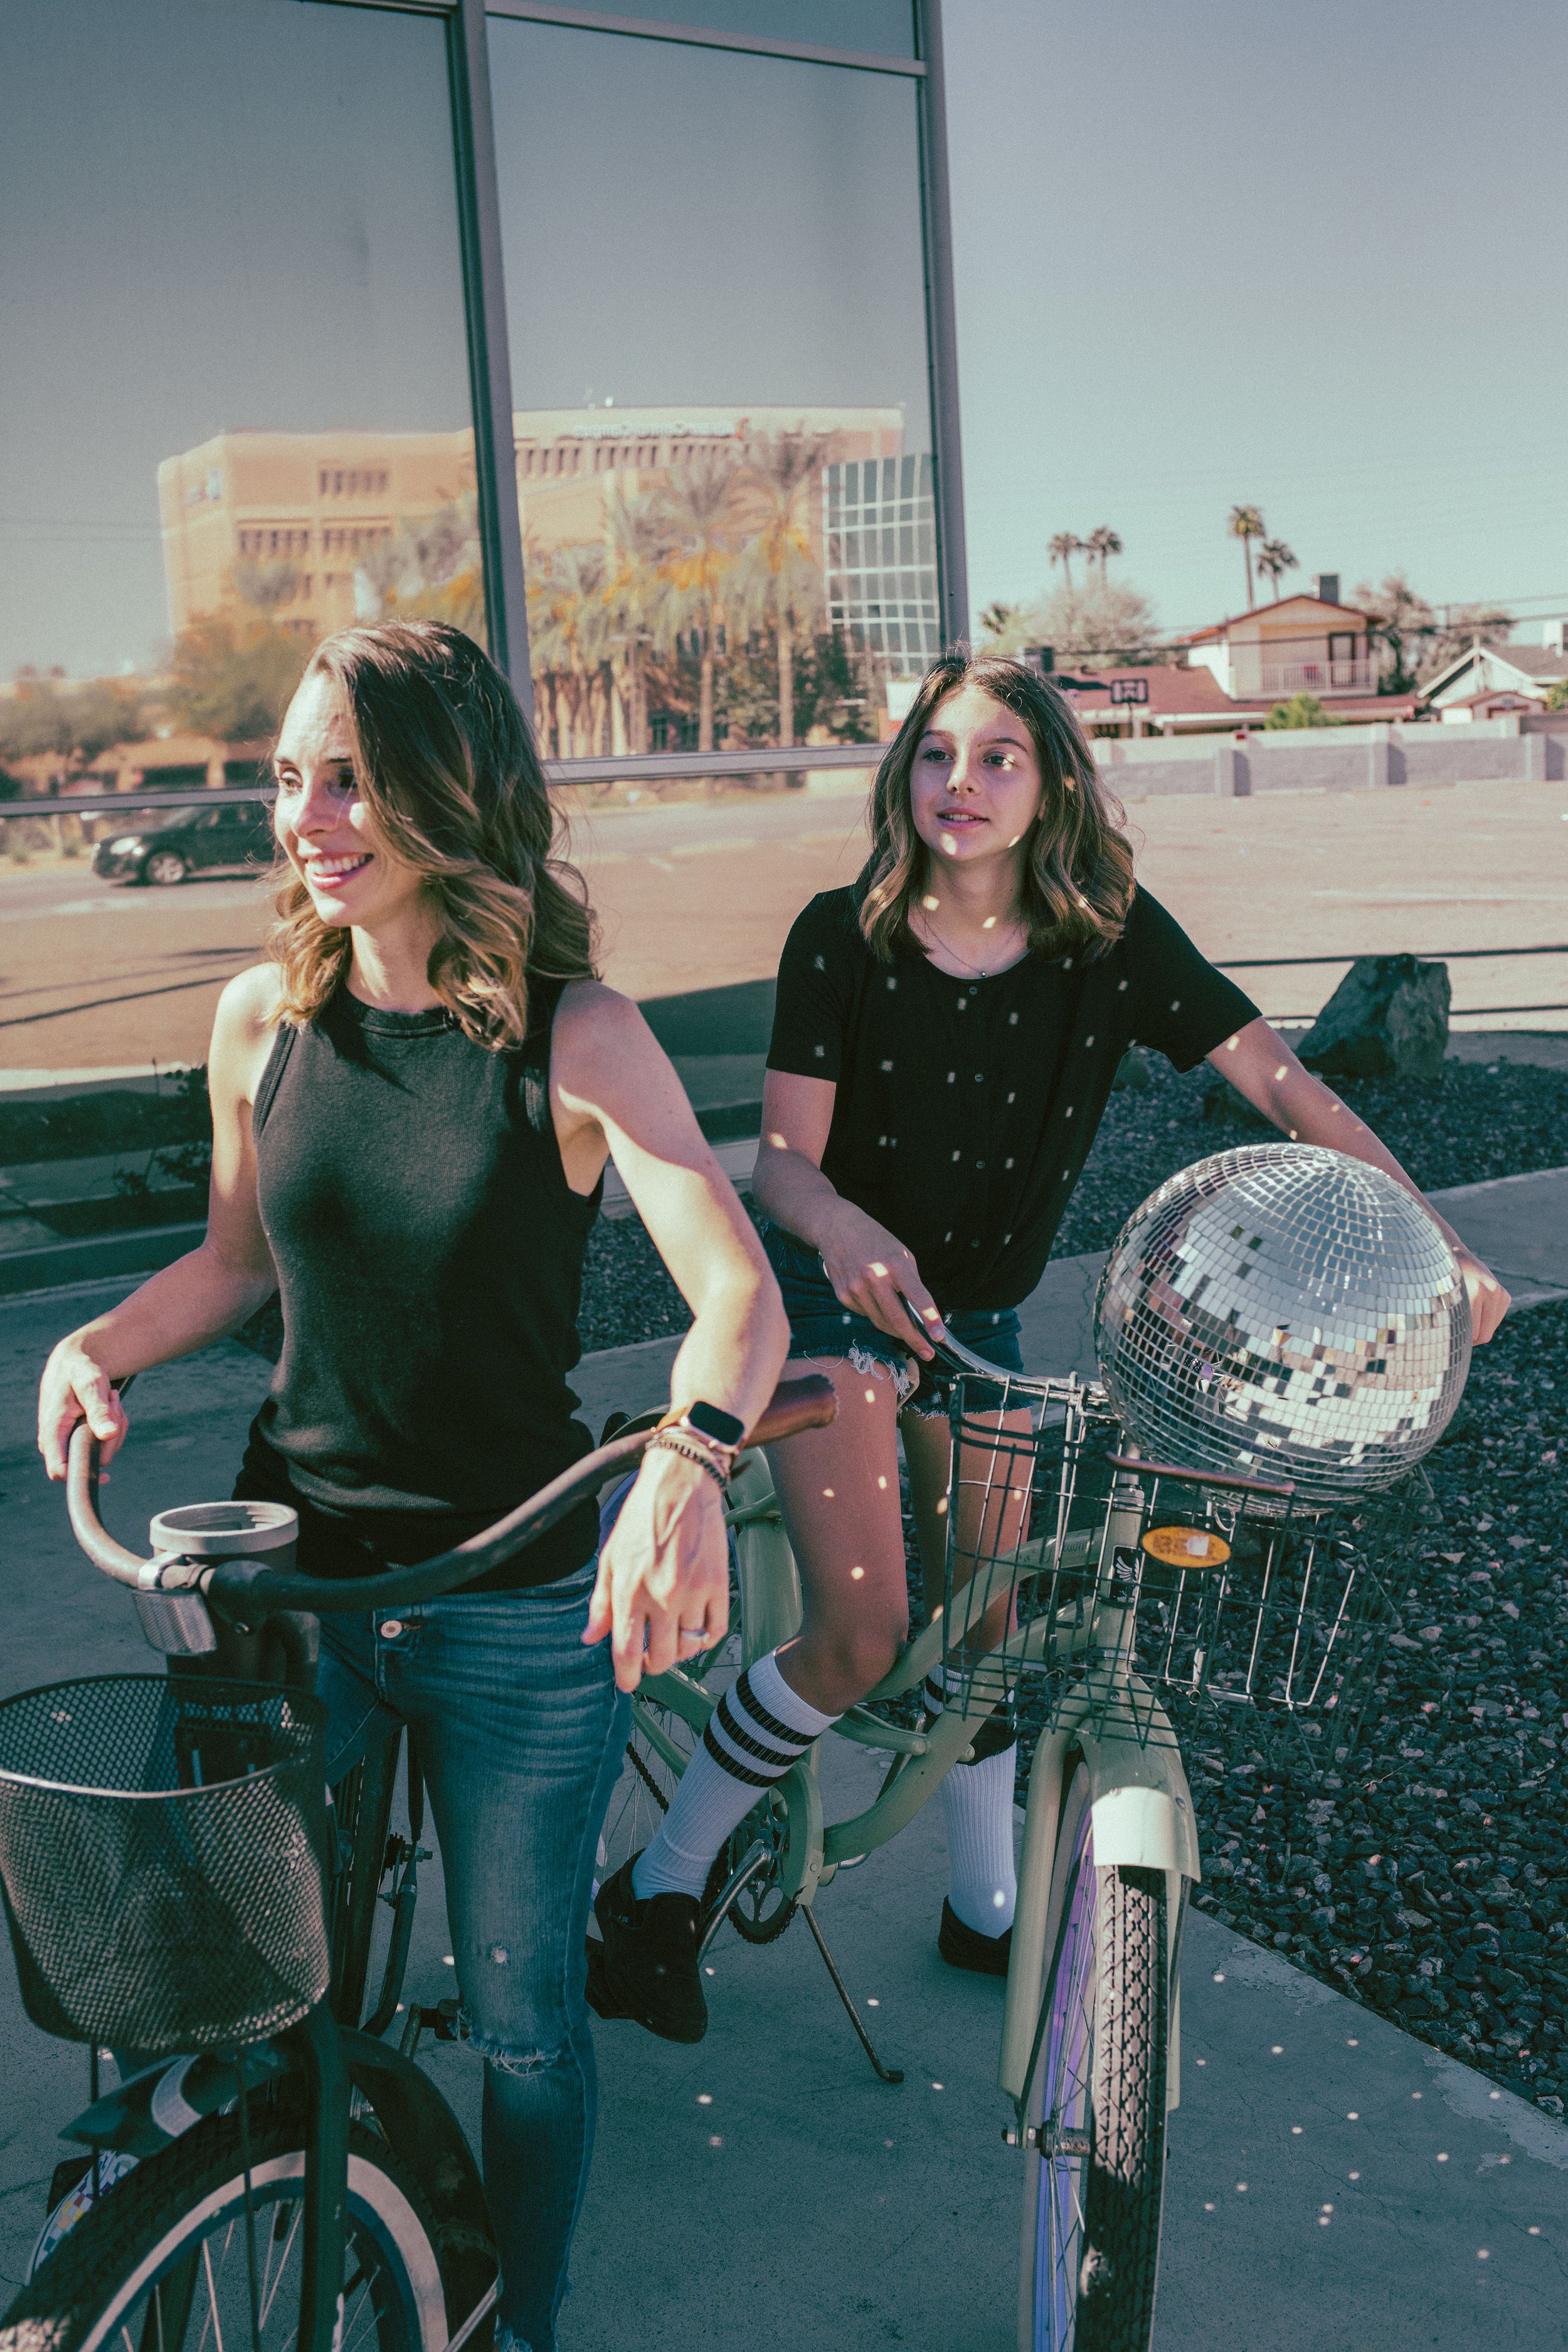 Family poses for their retro bike and skateboard photoshoot at Bowlero in Phoenix, Arizona by the most creative family photographer in Phoenix; Jennifer Lind Schutsky.